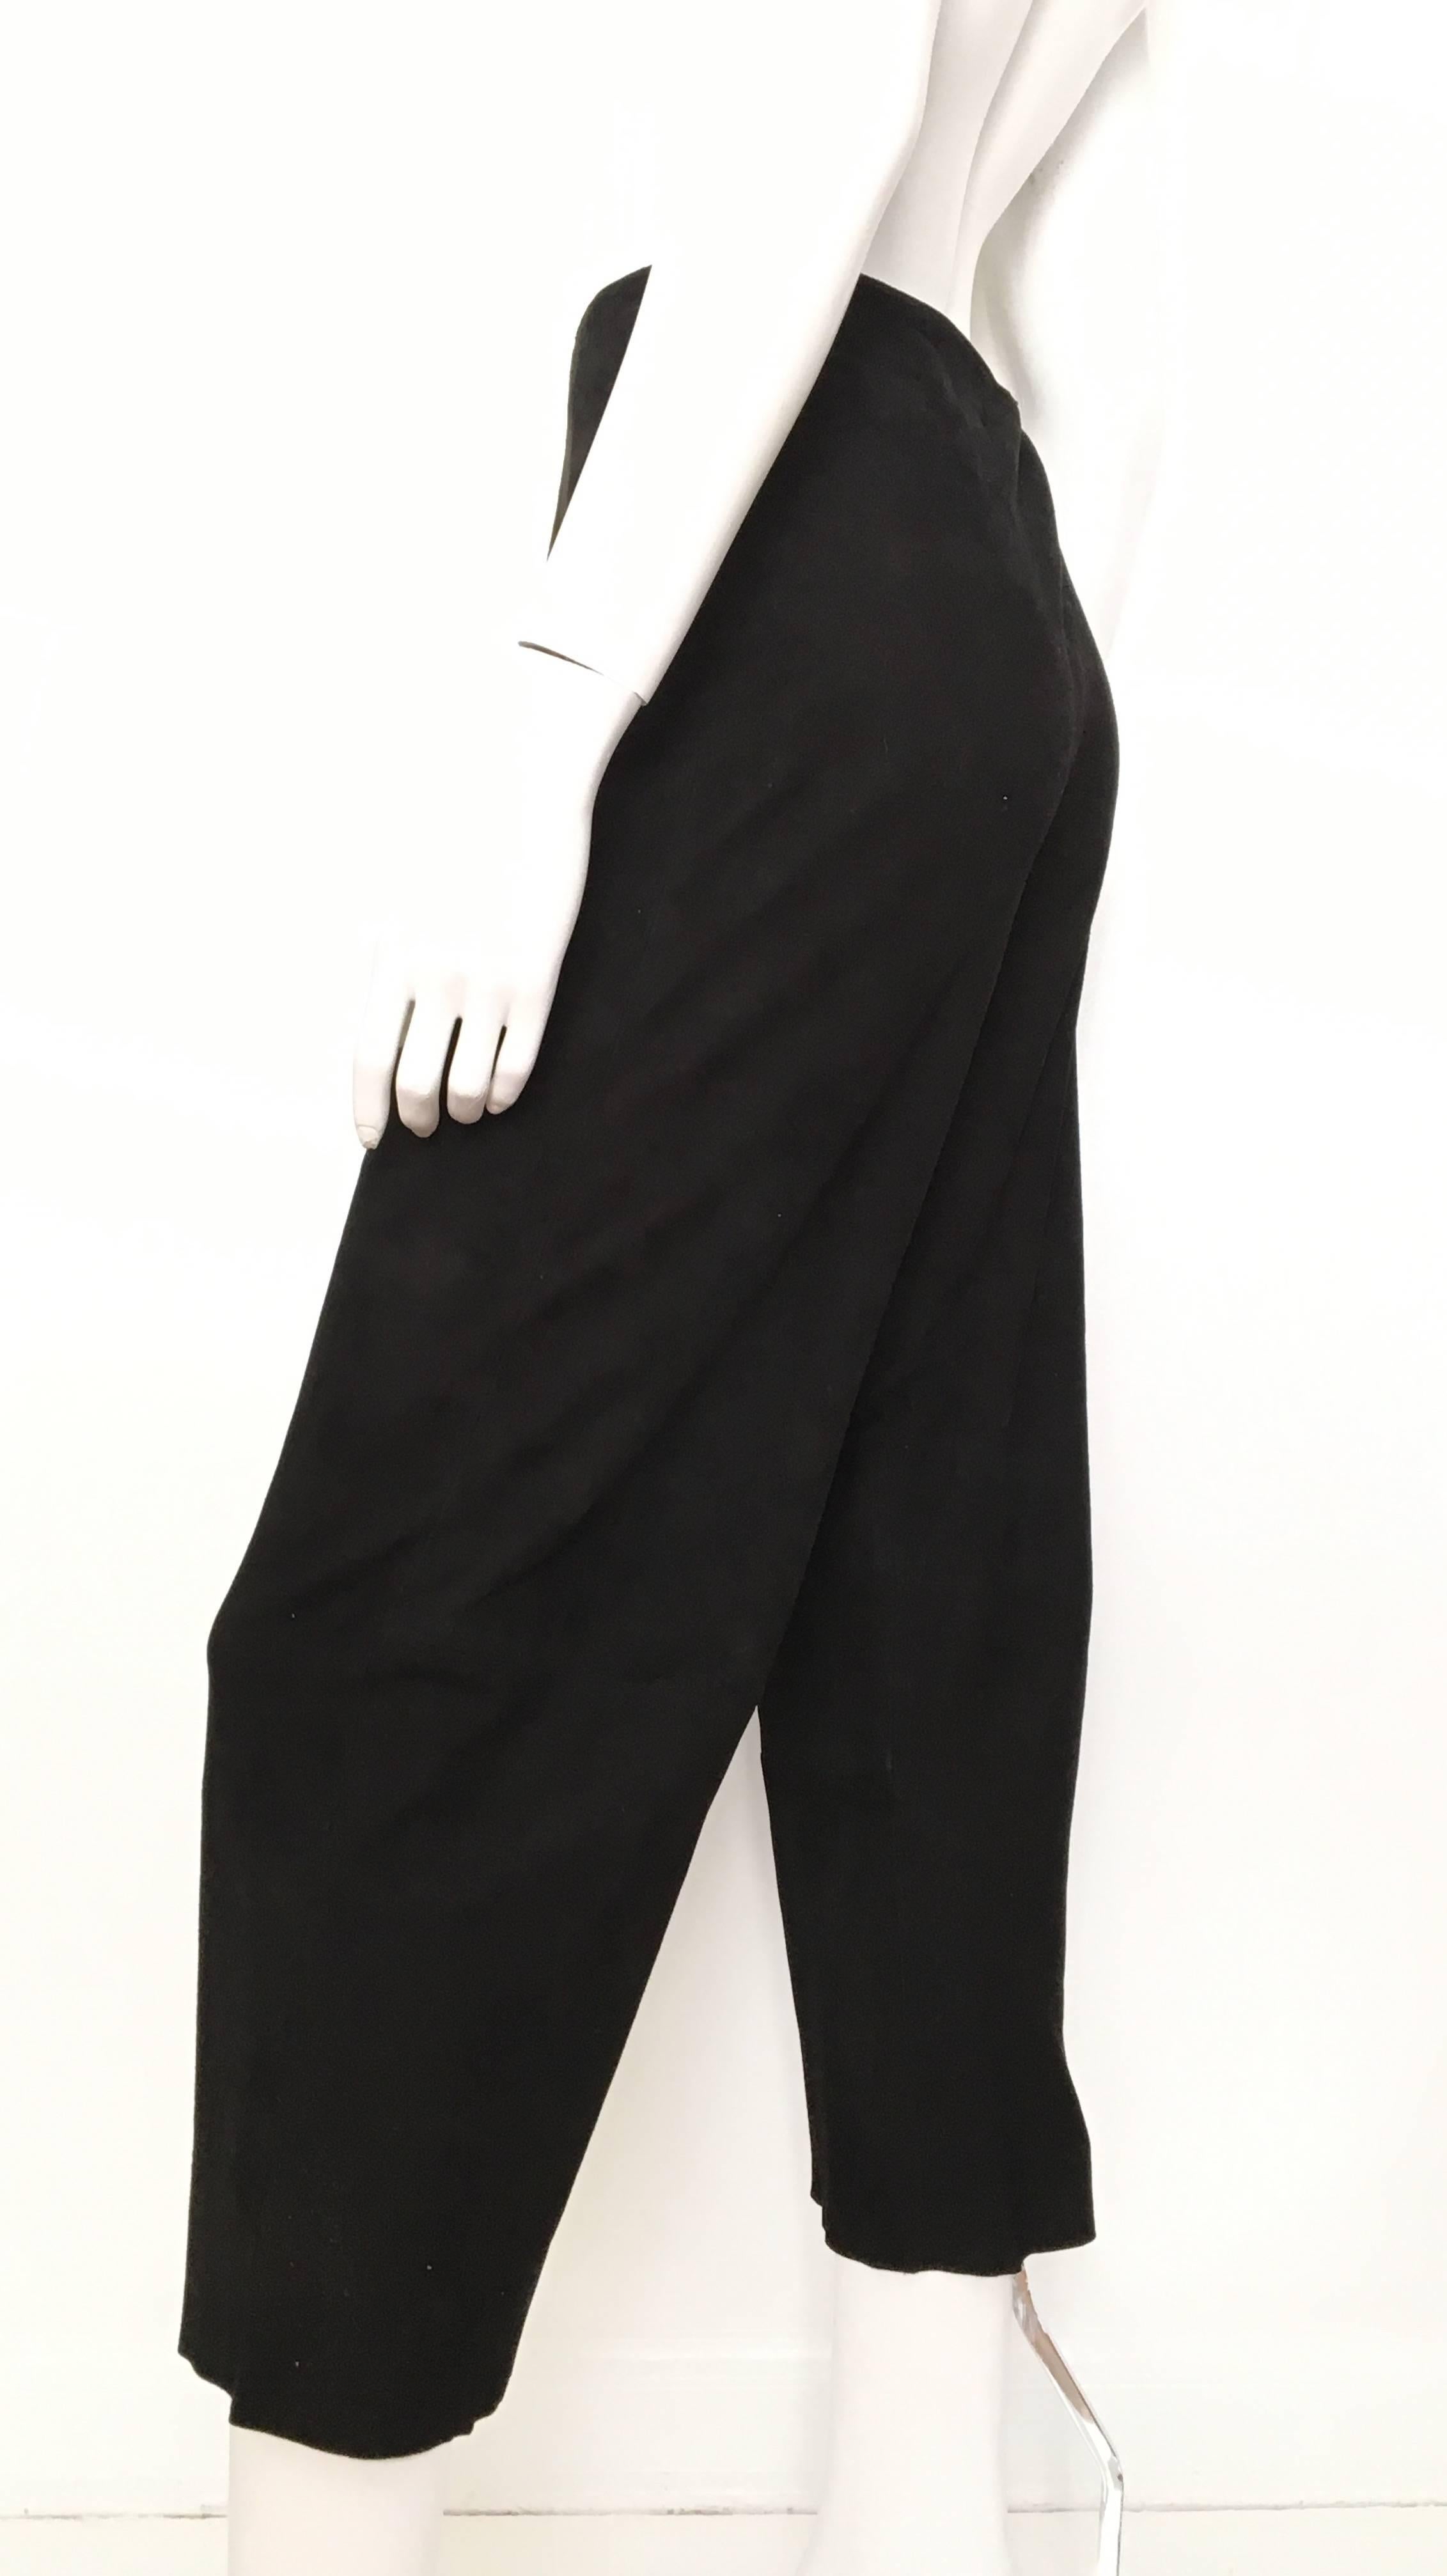 Hermes black lambskin gaucho pants French size 36 and fits like a USA size 4.  Please see & use measurements listed below so you can properly measure your lovely body to make certain it will fit. 
Pants are silk lined. 
Made in France.
Size